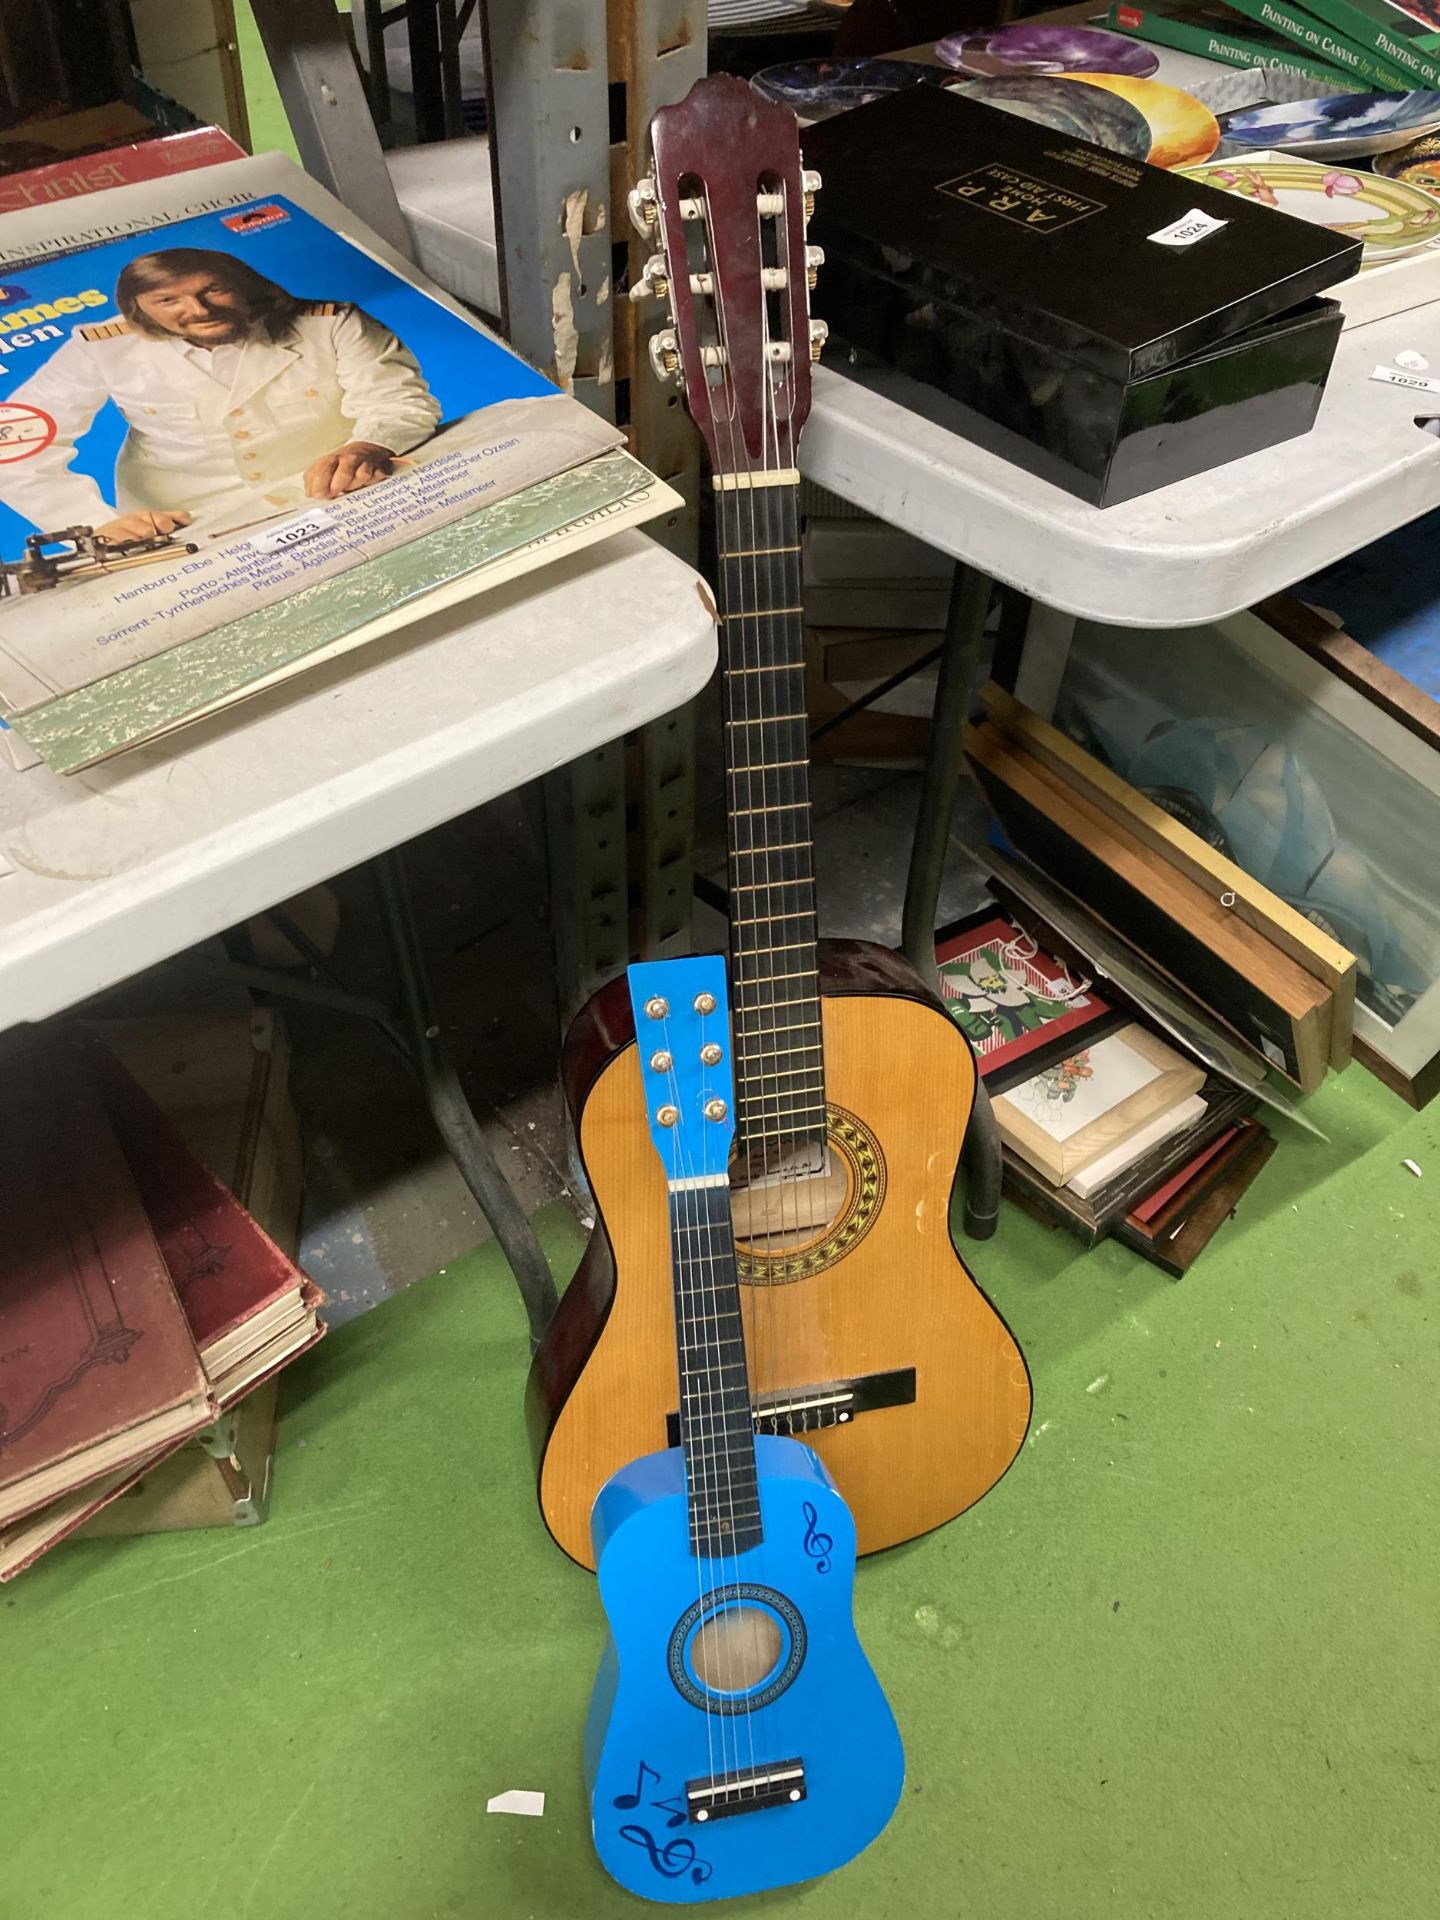 TWO ACOUSTIC GUITARS - ENCORE AND A BLUE CHILDREN'S EXAMPLE